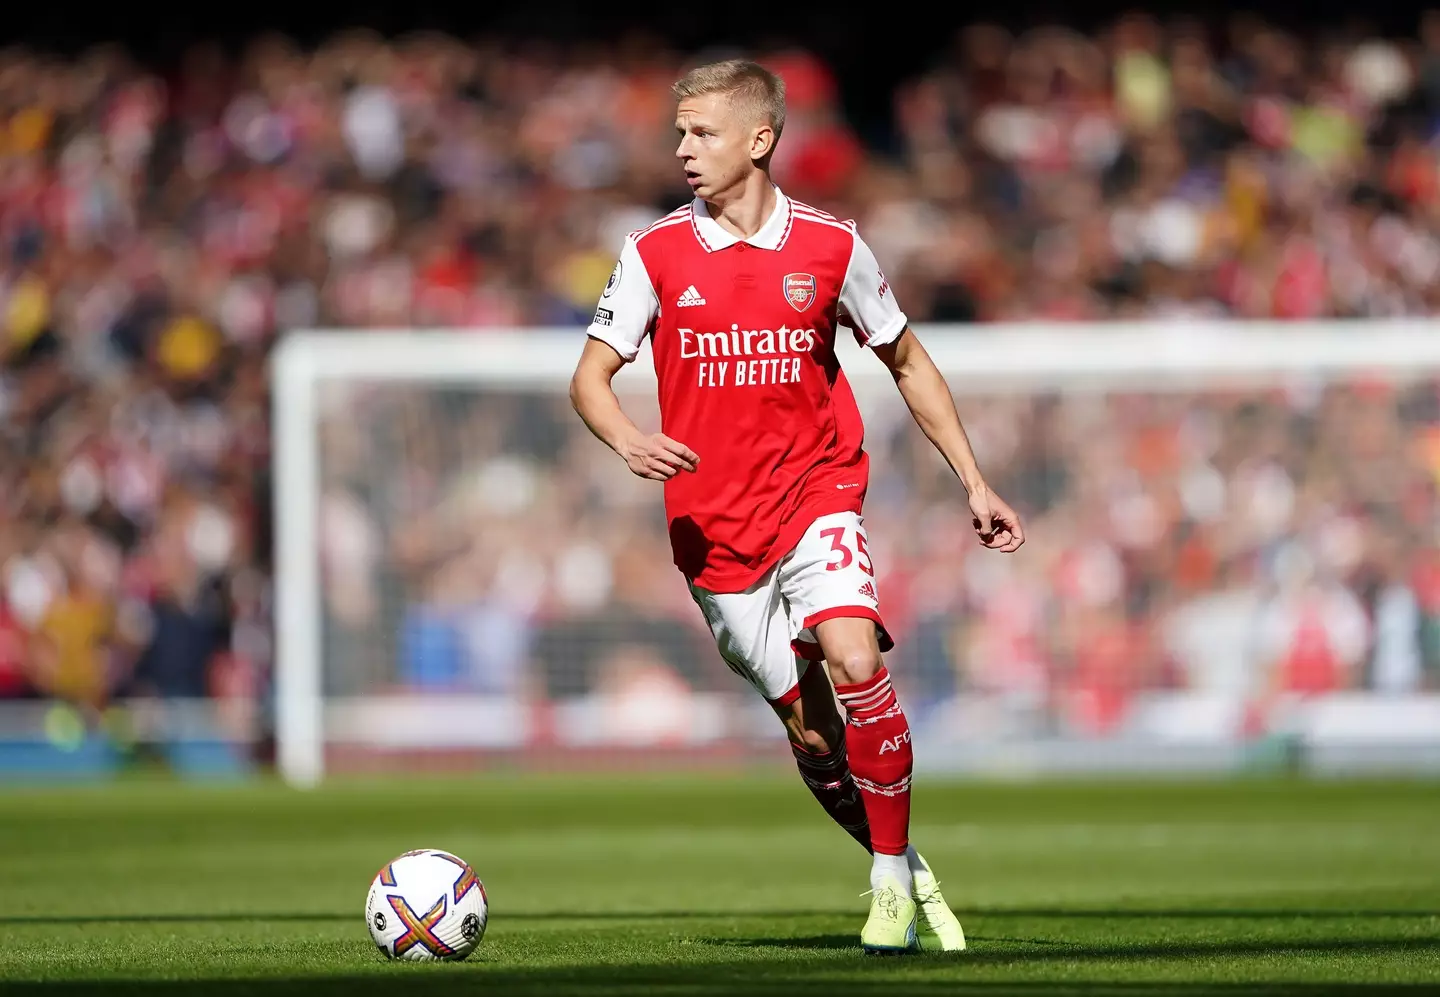 Zinchenko is good enough to play in the Arsenal 'Invincibles' team according to Frimpong. (Image